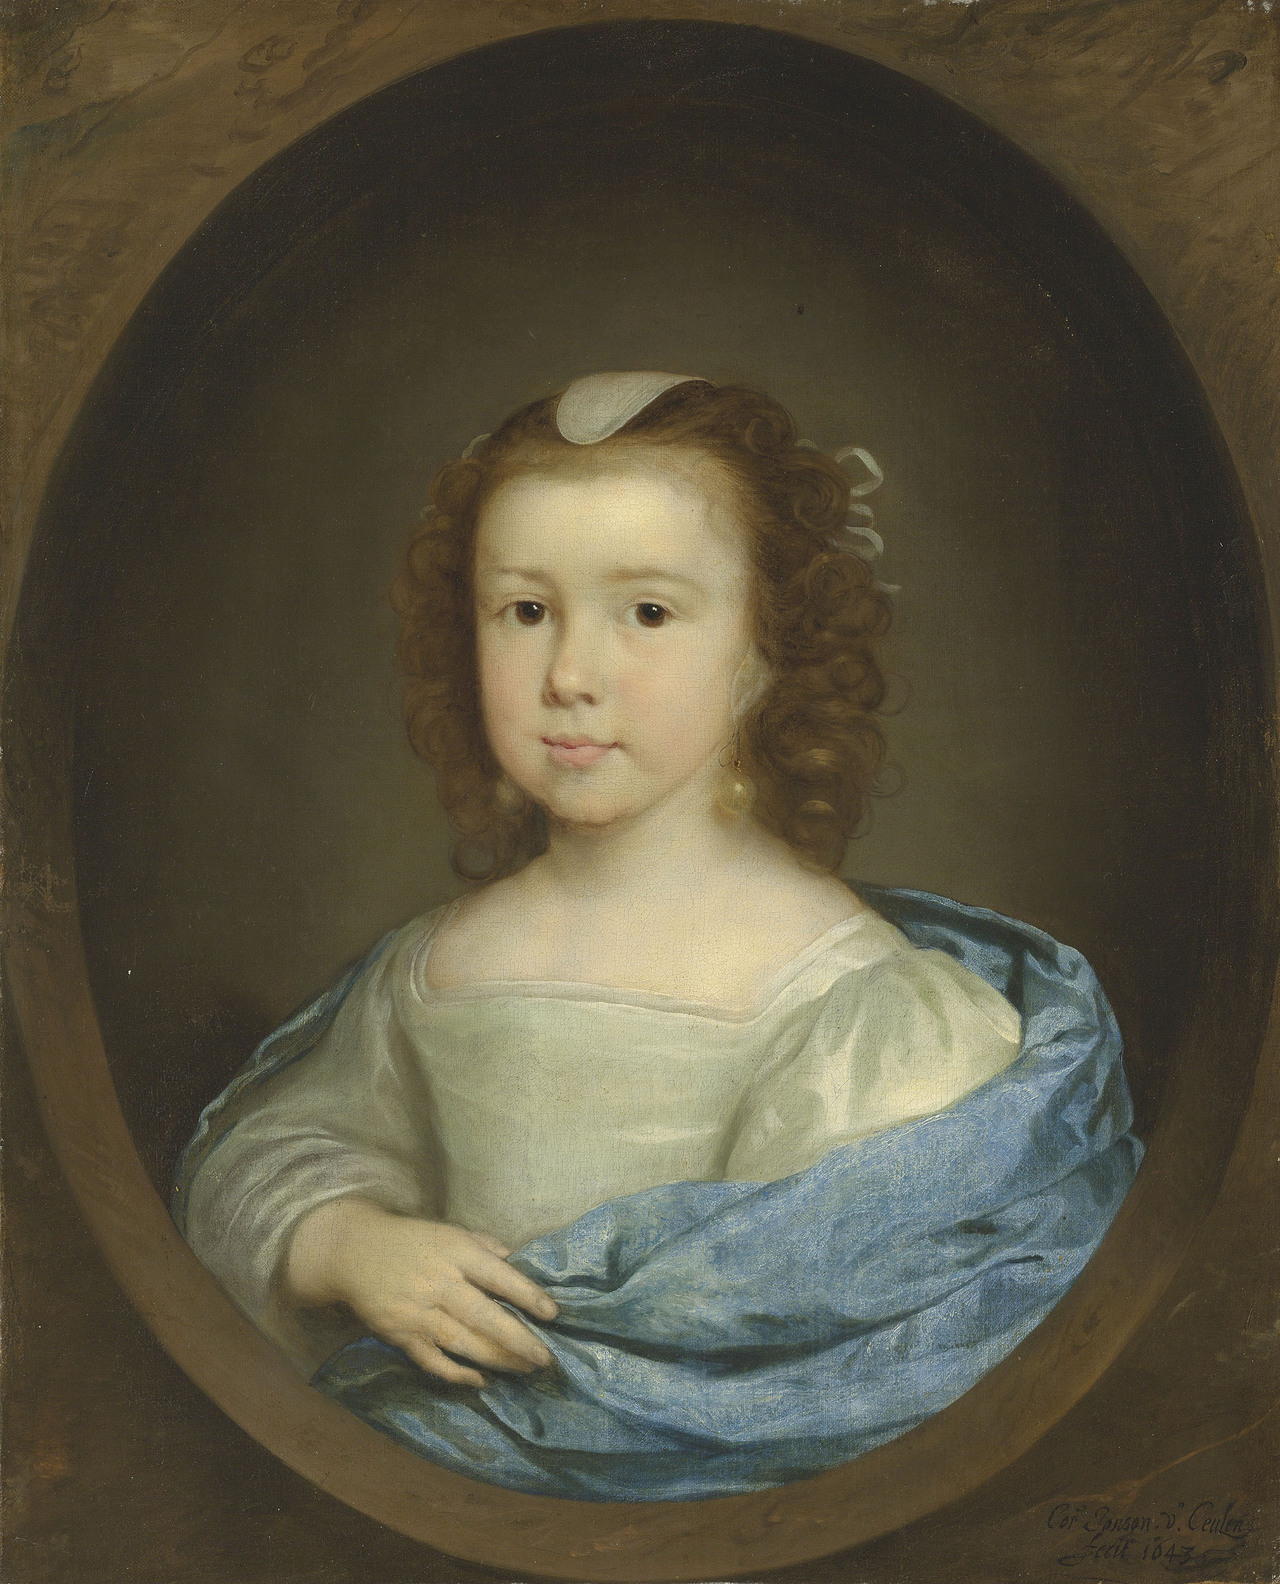 Cornelis Johnson van Ceulen (1593-1661), â€˜Portrait of a young girl, in a cream gown and blue wrapâ€™, c.1643, oil on canvas, Dutch, for sale est. 15,000-25,000 GBP in Christieâ€™s Old Masters Day sale, July 2019